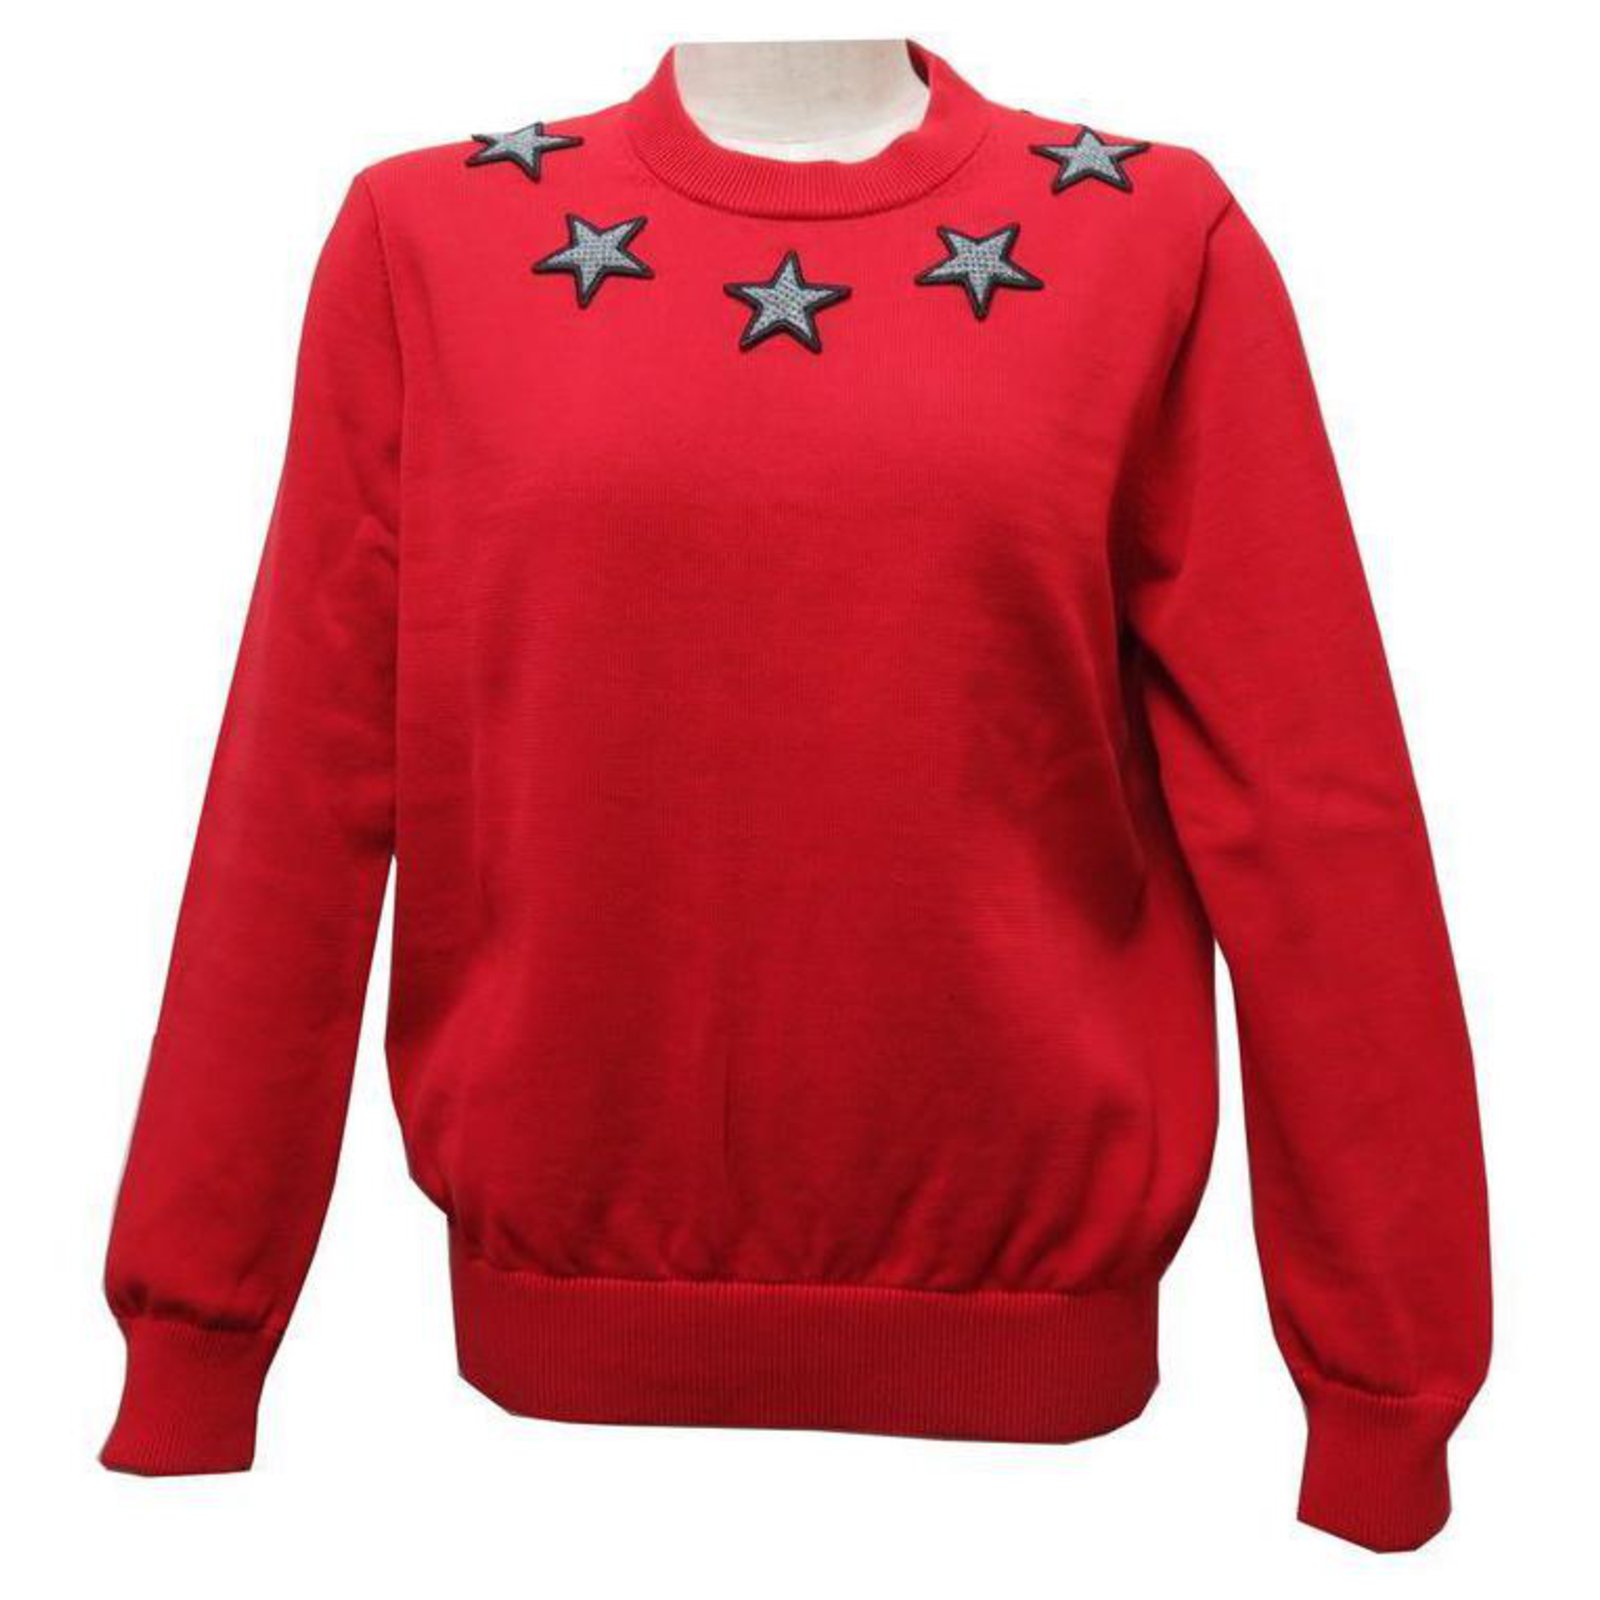 GIVENCHY SWEATER IN RED COTTON T 50 M STAR PATCHES WITH GRAY COLLAR RED  SWEATSHIRT